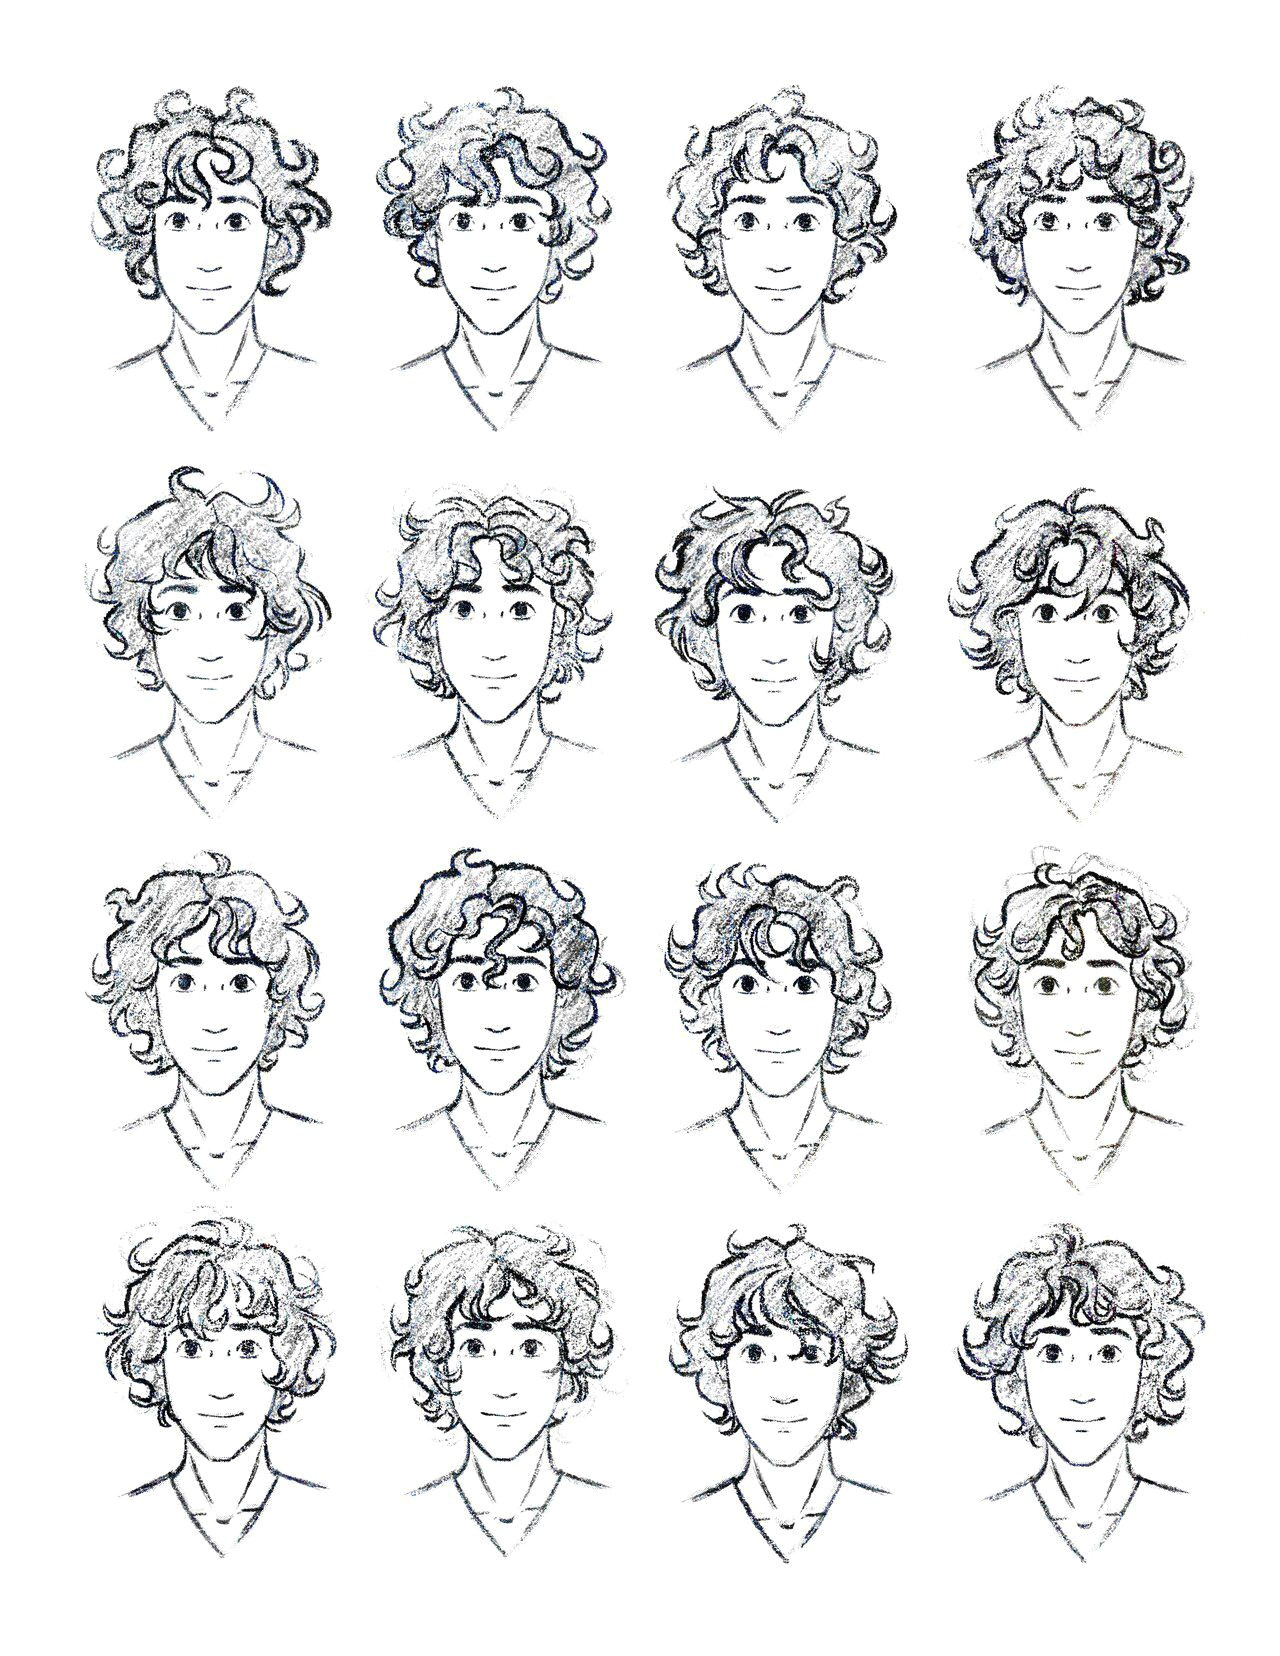 Drawing Cartoon Hairstyles Curly Hair Reference for Guys totally Need This Drawing